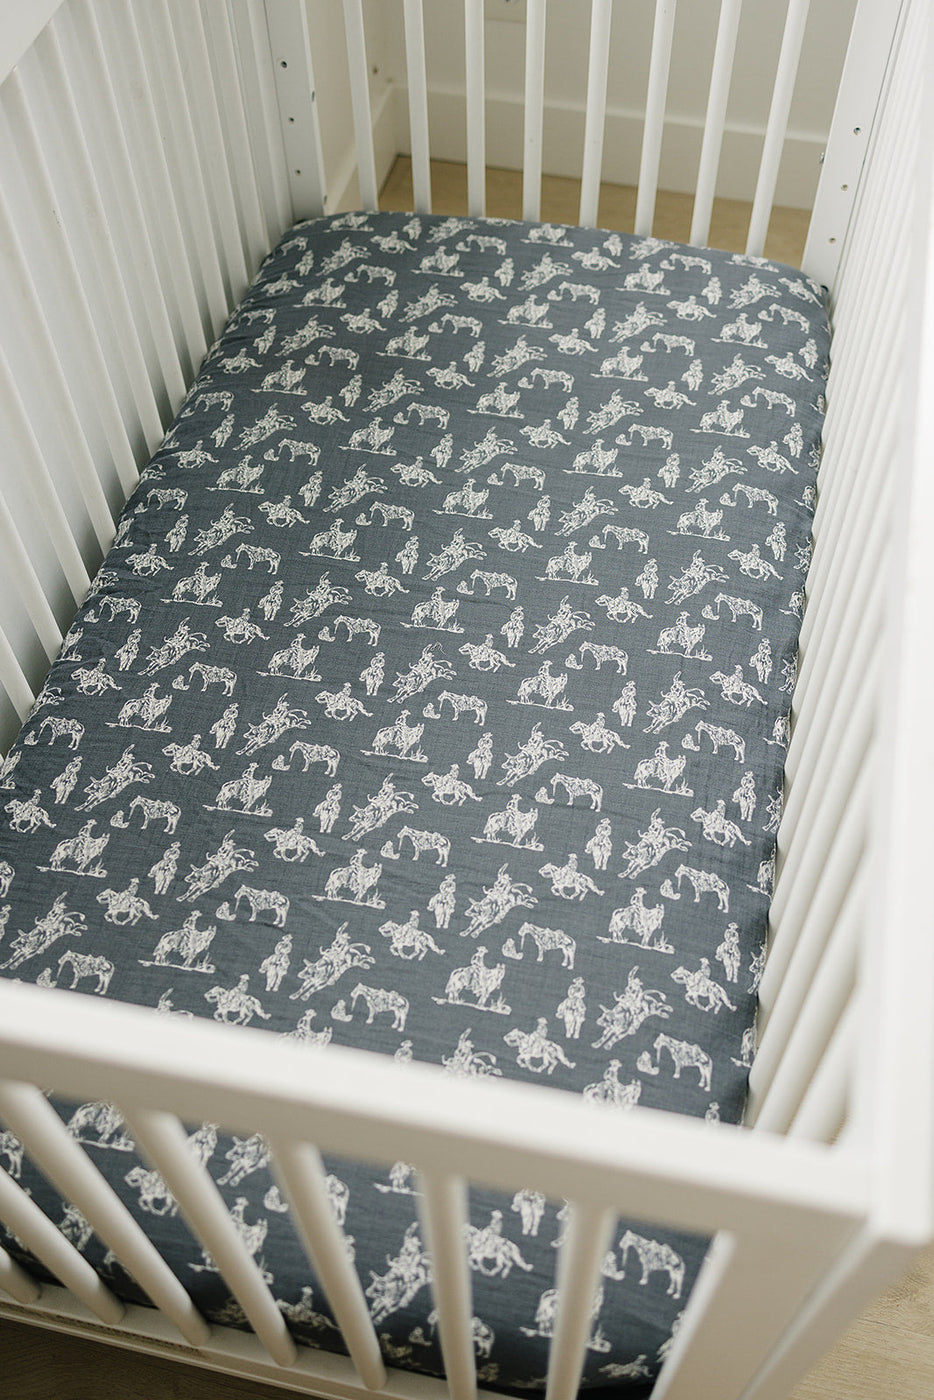 a crib with a black and white sheet with horses on it